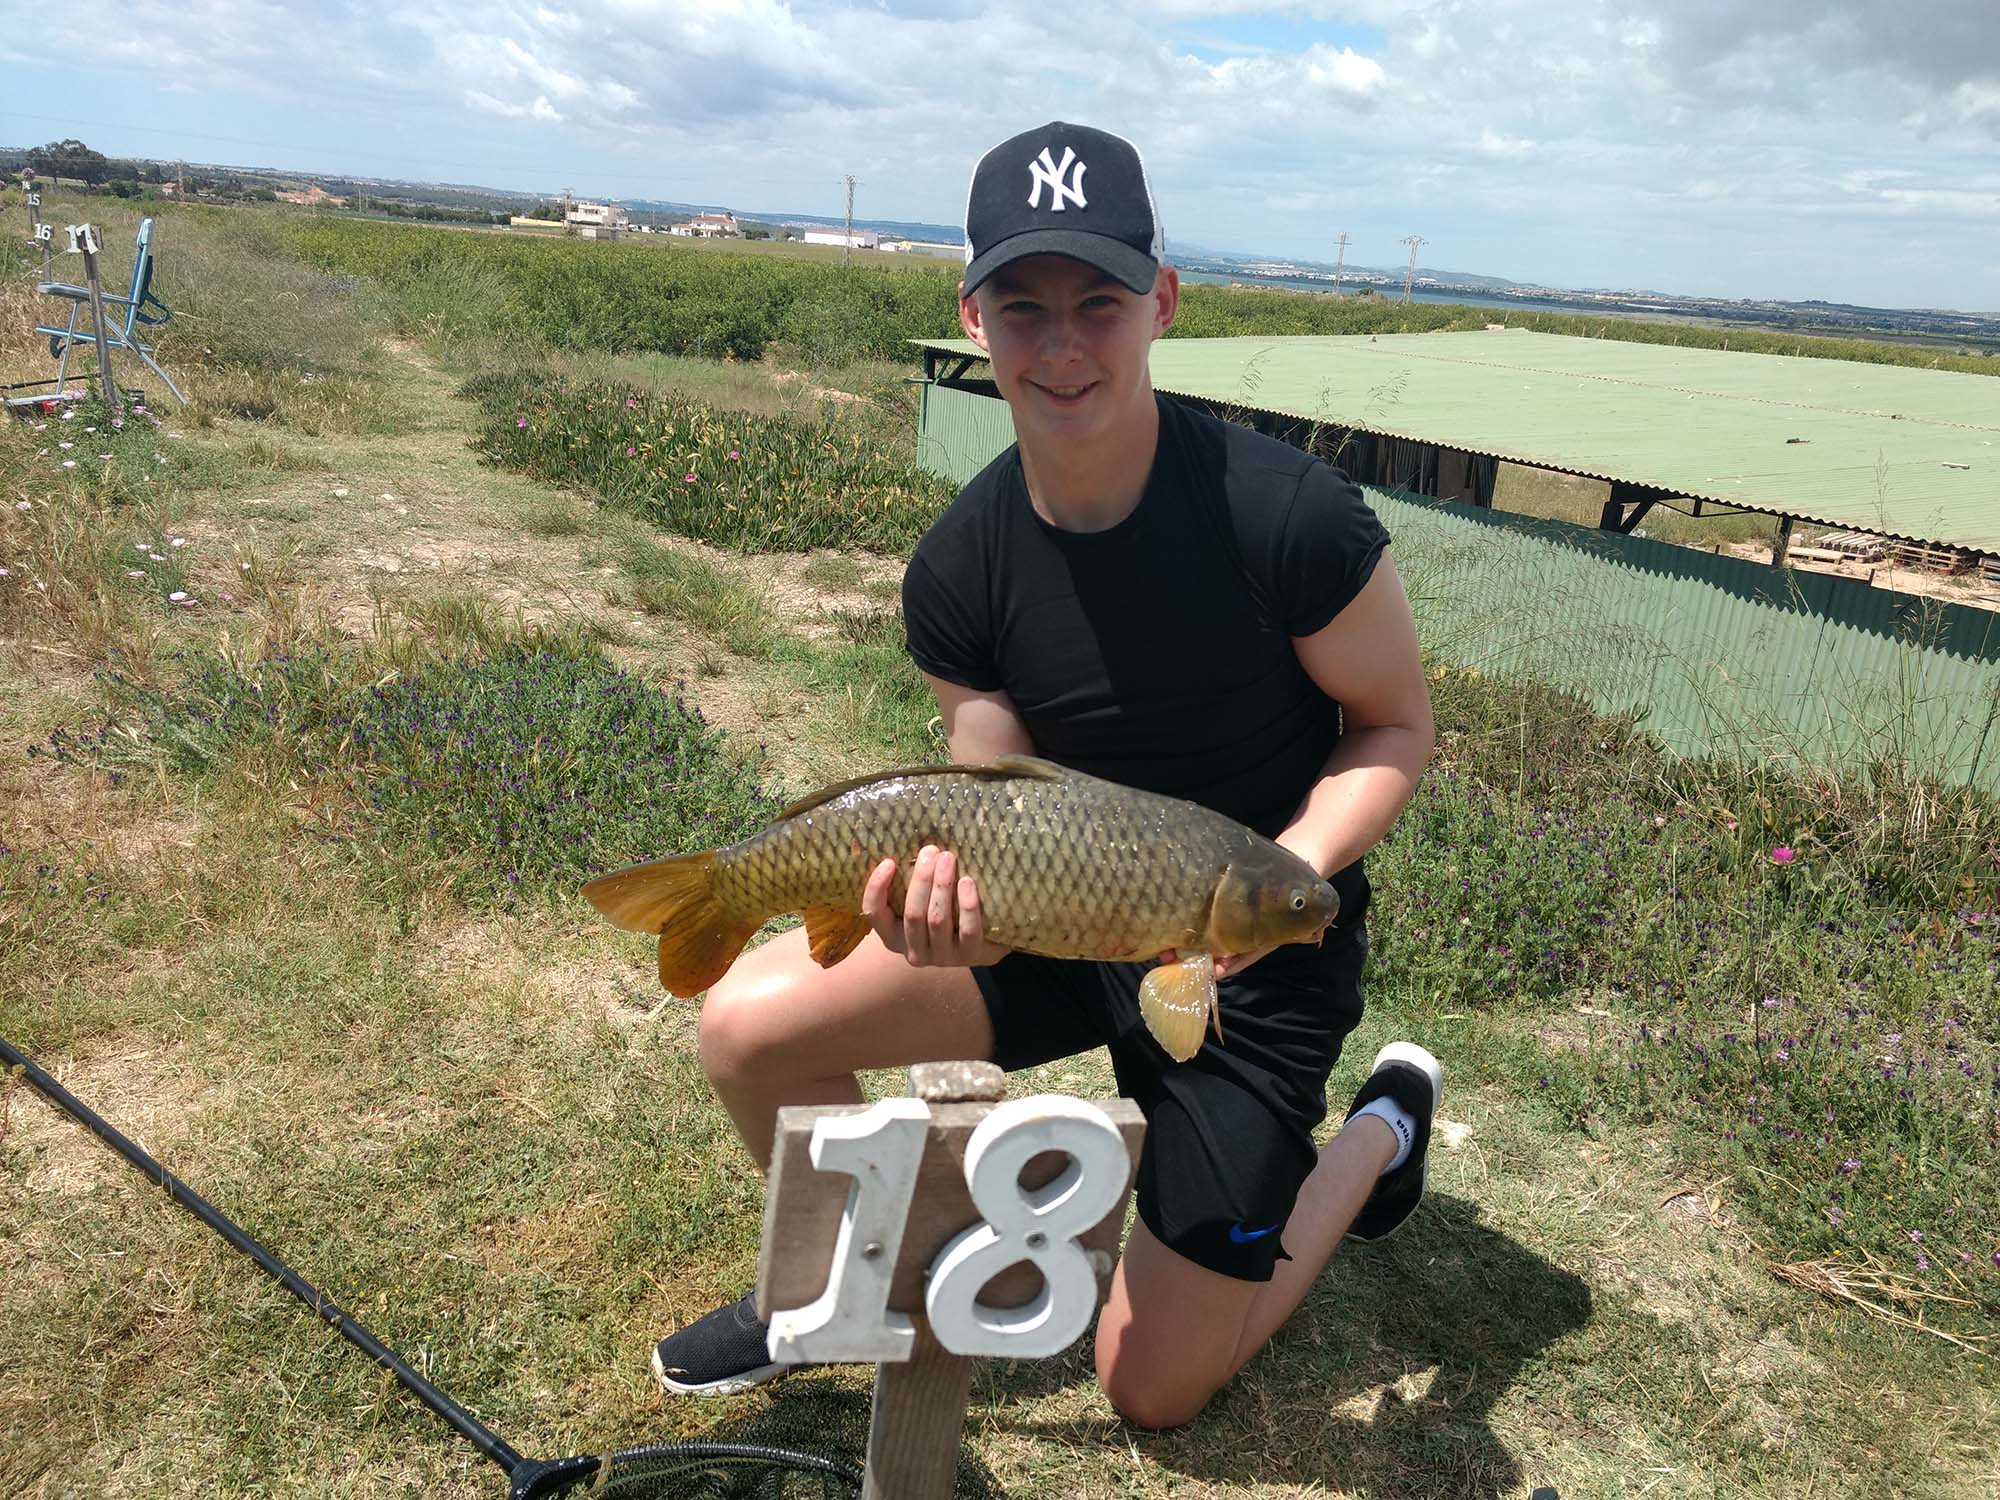 Nathan Broome, Stoke City under 18 and England under 17 International goalkeeper caught this fine carp at the El Paraiso Fishing venue when visiting his Gran and Grandad recently.  This was one that Nathan didn't mind lifting out the net for a photograph.